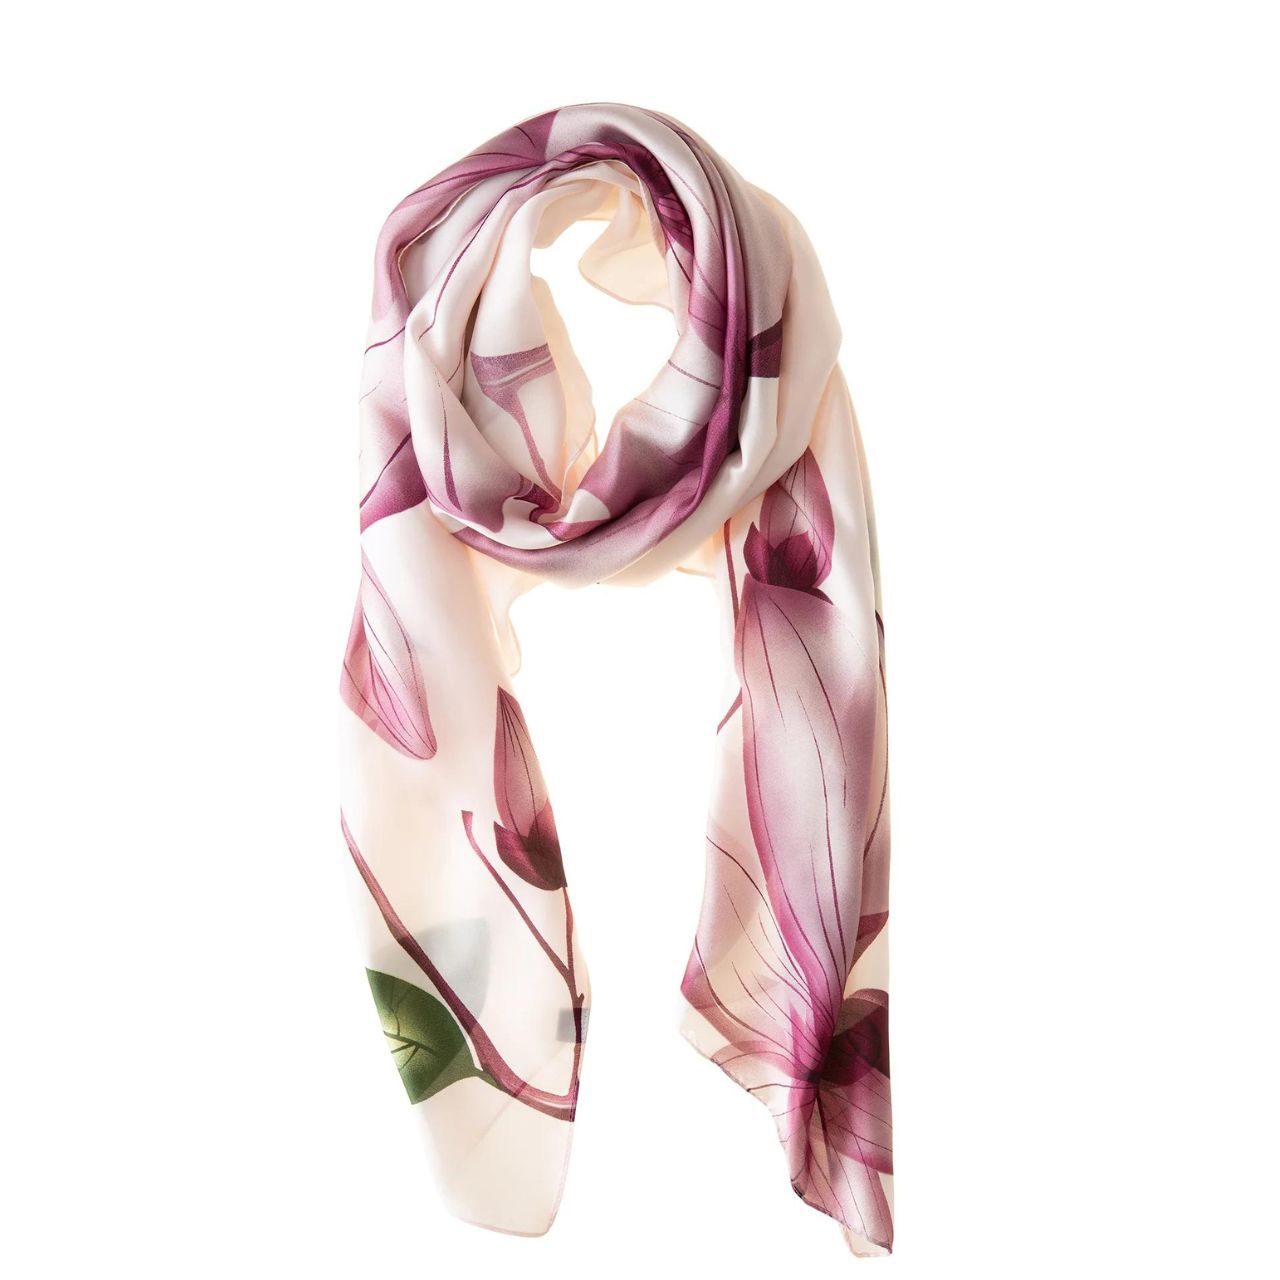 Mulberry Blossom Polyester Scarf  ﻿Our Mulberry Blossom Polyester Scarf is the perfect rich colour that will draw attention and complement any outfit. This rich, soft and comfortable scarf is a must have and also comes in a beautiful box ready for gifting. A touch of luxury for everyday life and perfect for all seasons.